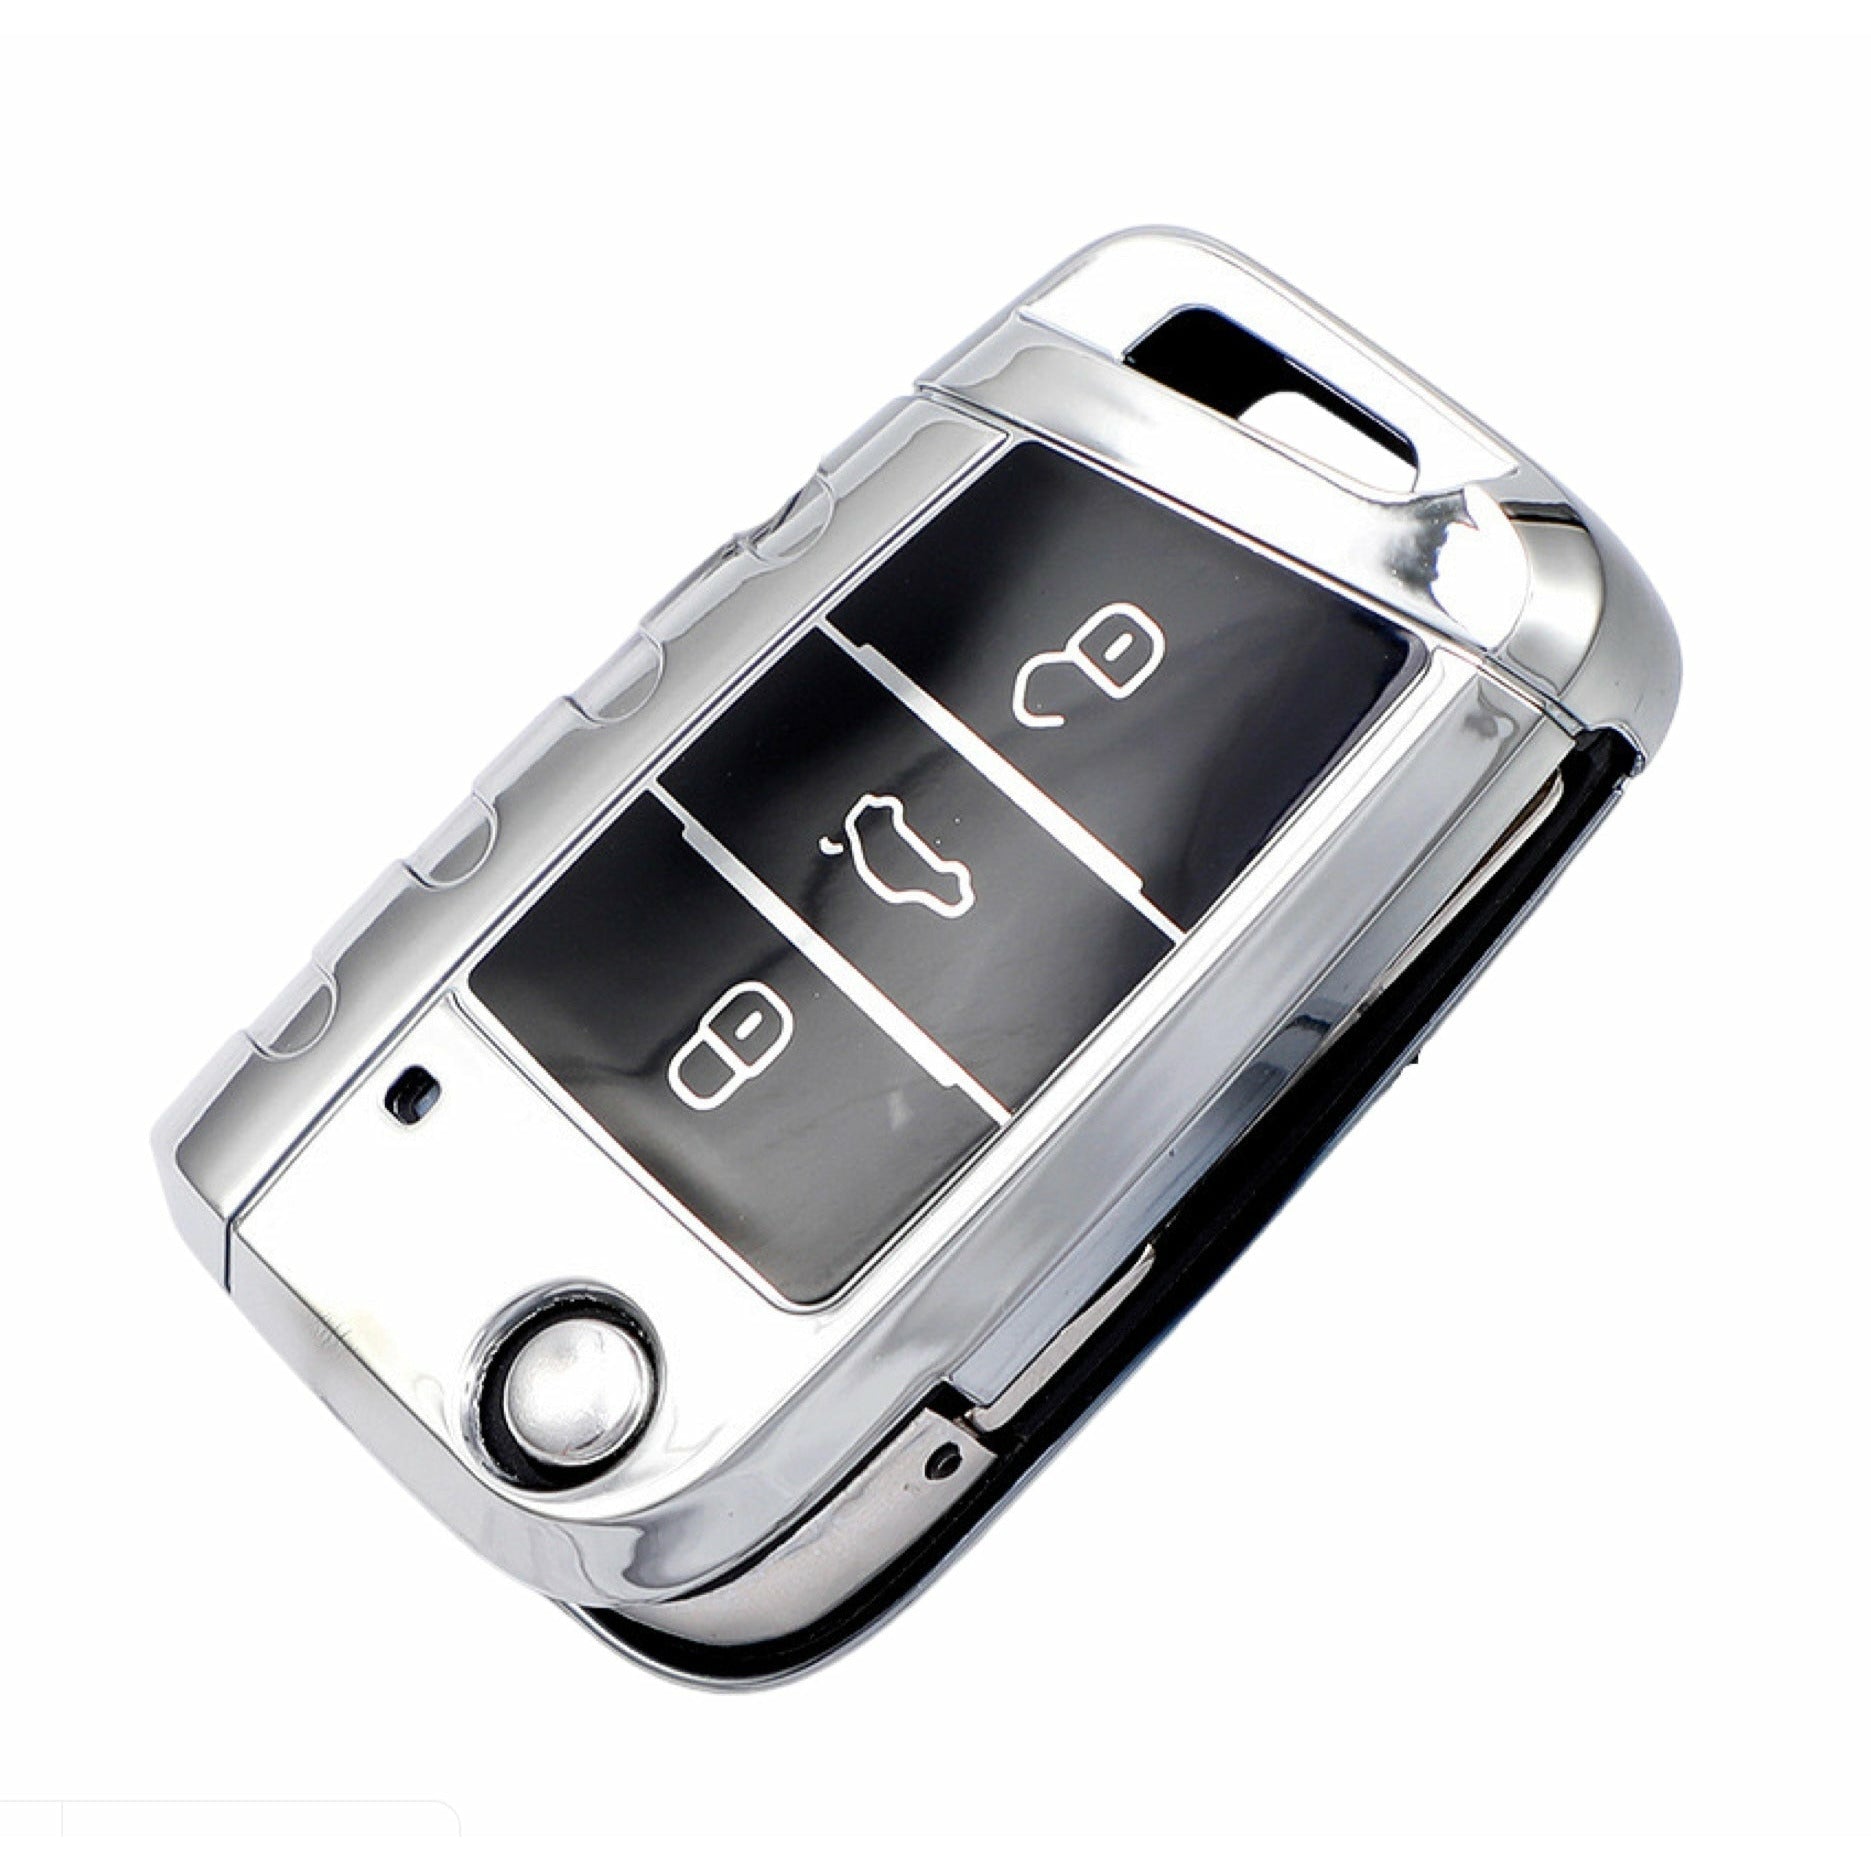 Volkswagen car key cover silver | Key fob cover for VW Golf, Passat, Polo, Tiguan, Touareg.| volkswagen accessories - Keysleeves